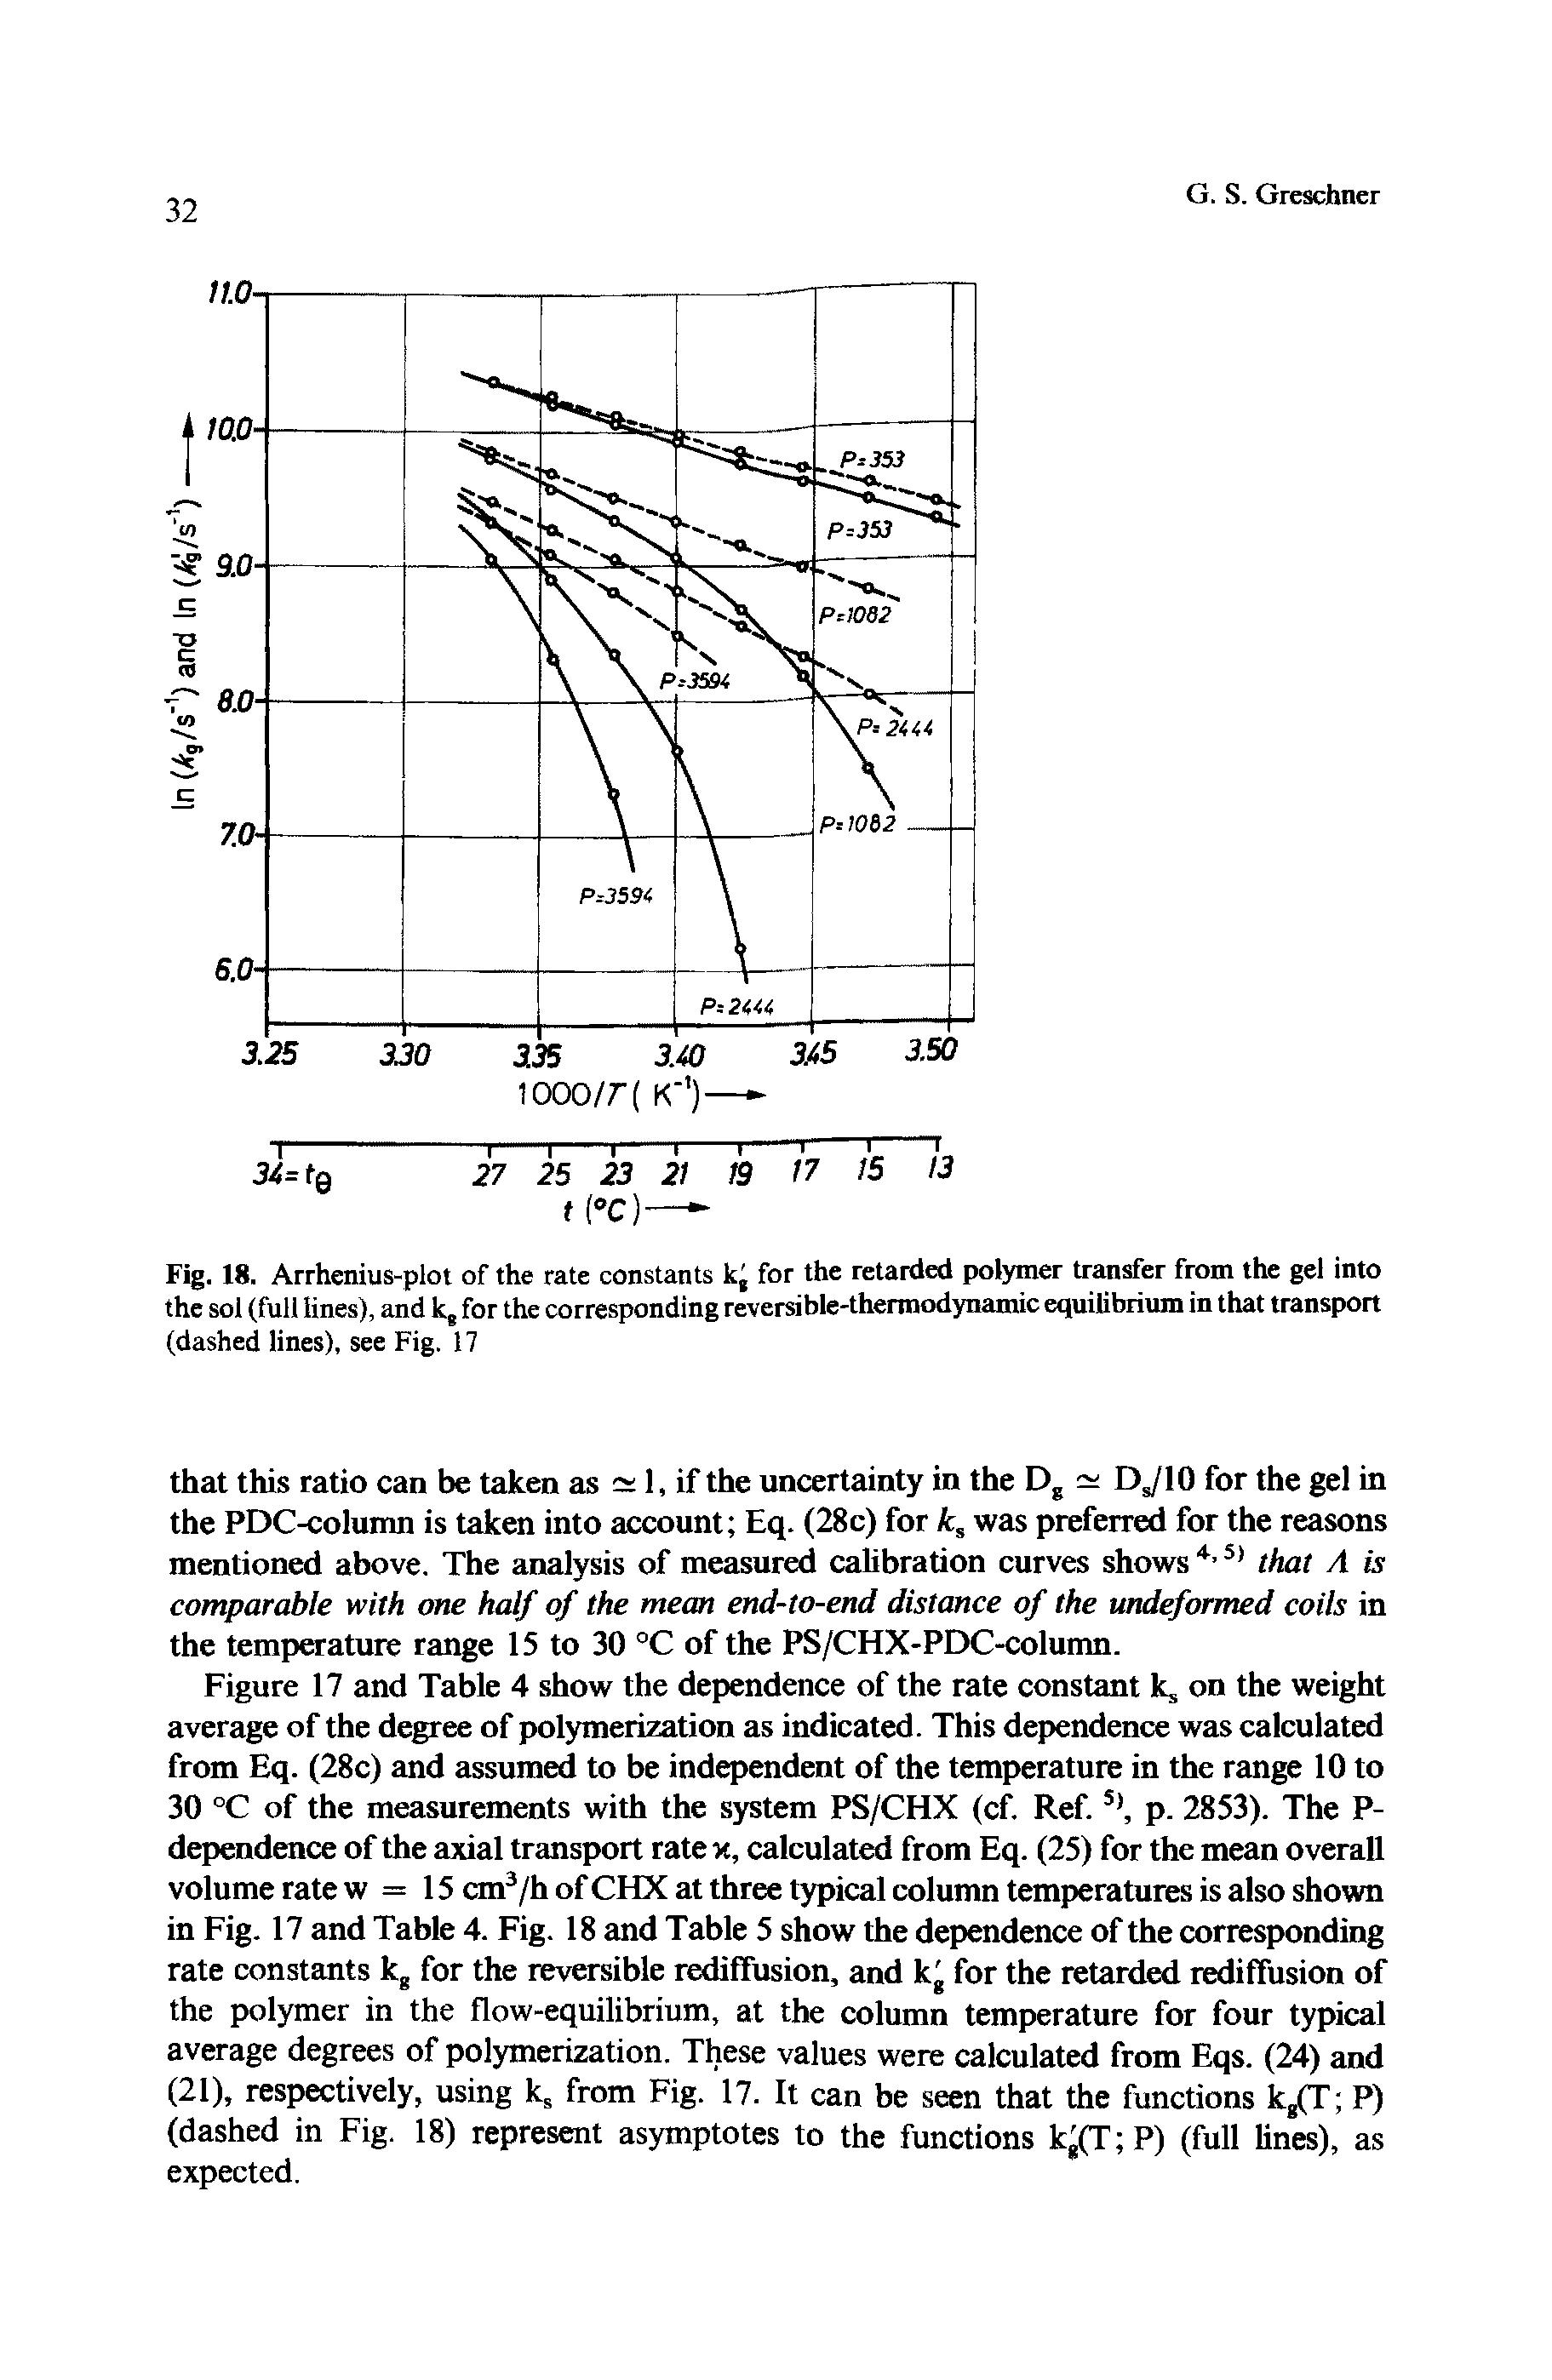 Fig. 18. Arrhenius-plot of the rate constants kg for the retarded polymer transfer from the gel into the sol (full lines), and ks for the corresponding reversible-thermodynamic equilibrium in that transport (dashed lines), see Fig. 17...